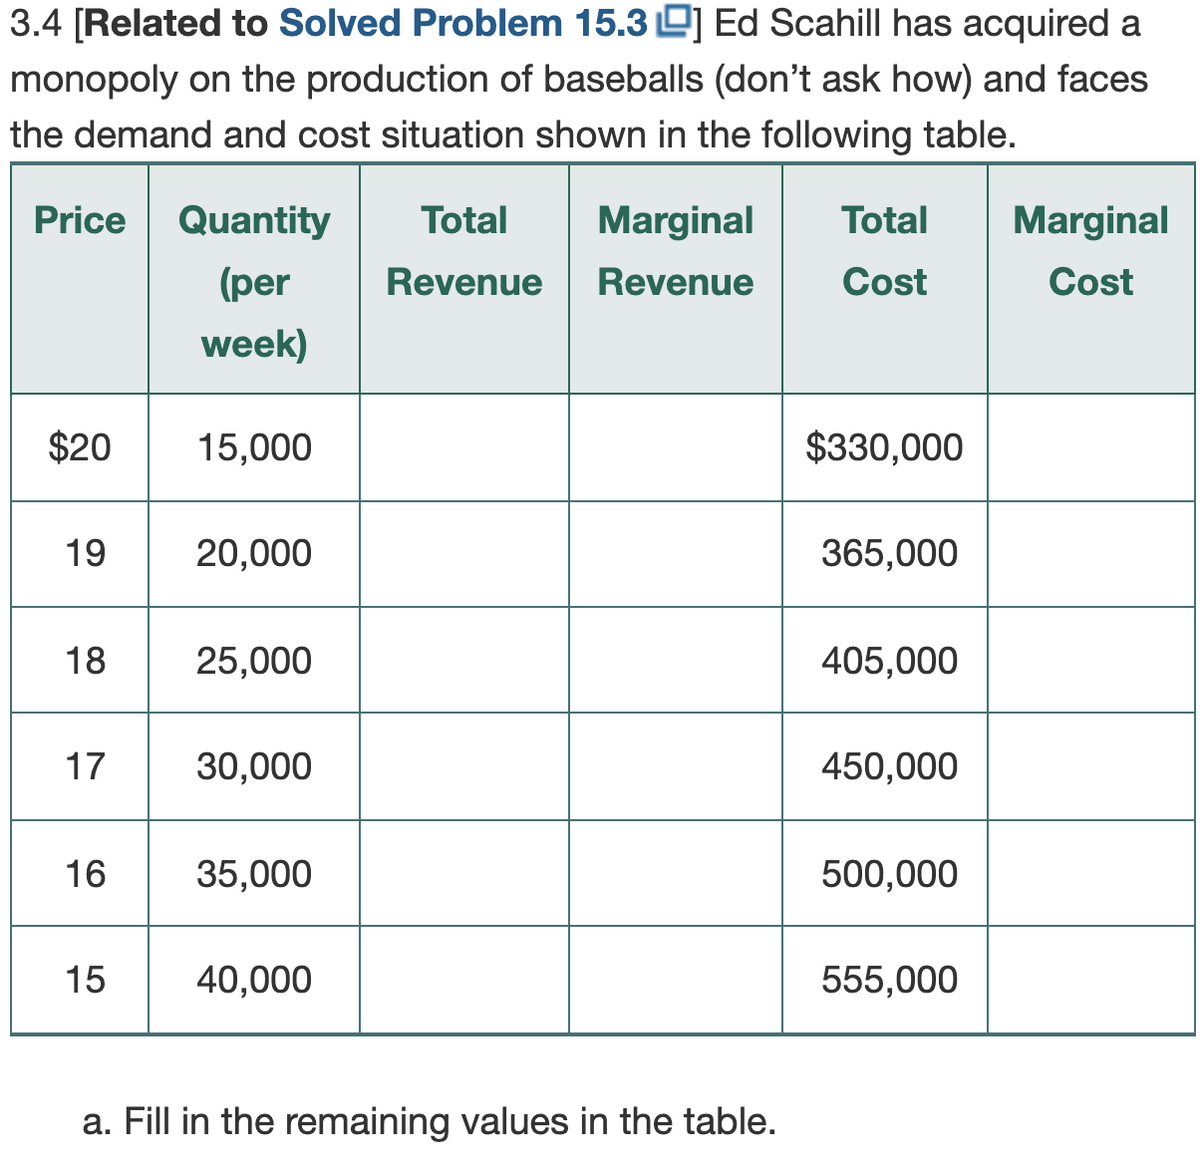 3.4 [Related to Solved Problem 15.3 L] Ed Scahill has acquired a
monopoly on the production of baseballs (don't ask how) and faces
the demand and cost situation shown in the following table.
Price
Quantity
Total
Marginal
Total
Marginal
(per
Revenue
Revenue
Cost
Cost
week)
$20
15,000
$330,000
19
20,000
365,000
18
25,000
405,000
17
30,000
450,000
16
35,000
500,000
15
40,000
555,000
a. Fill in the remaining values in the table.
